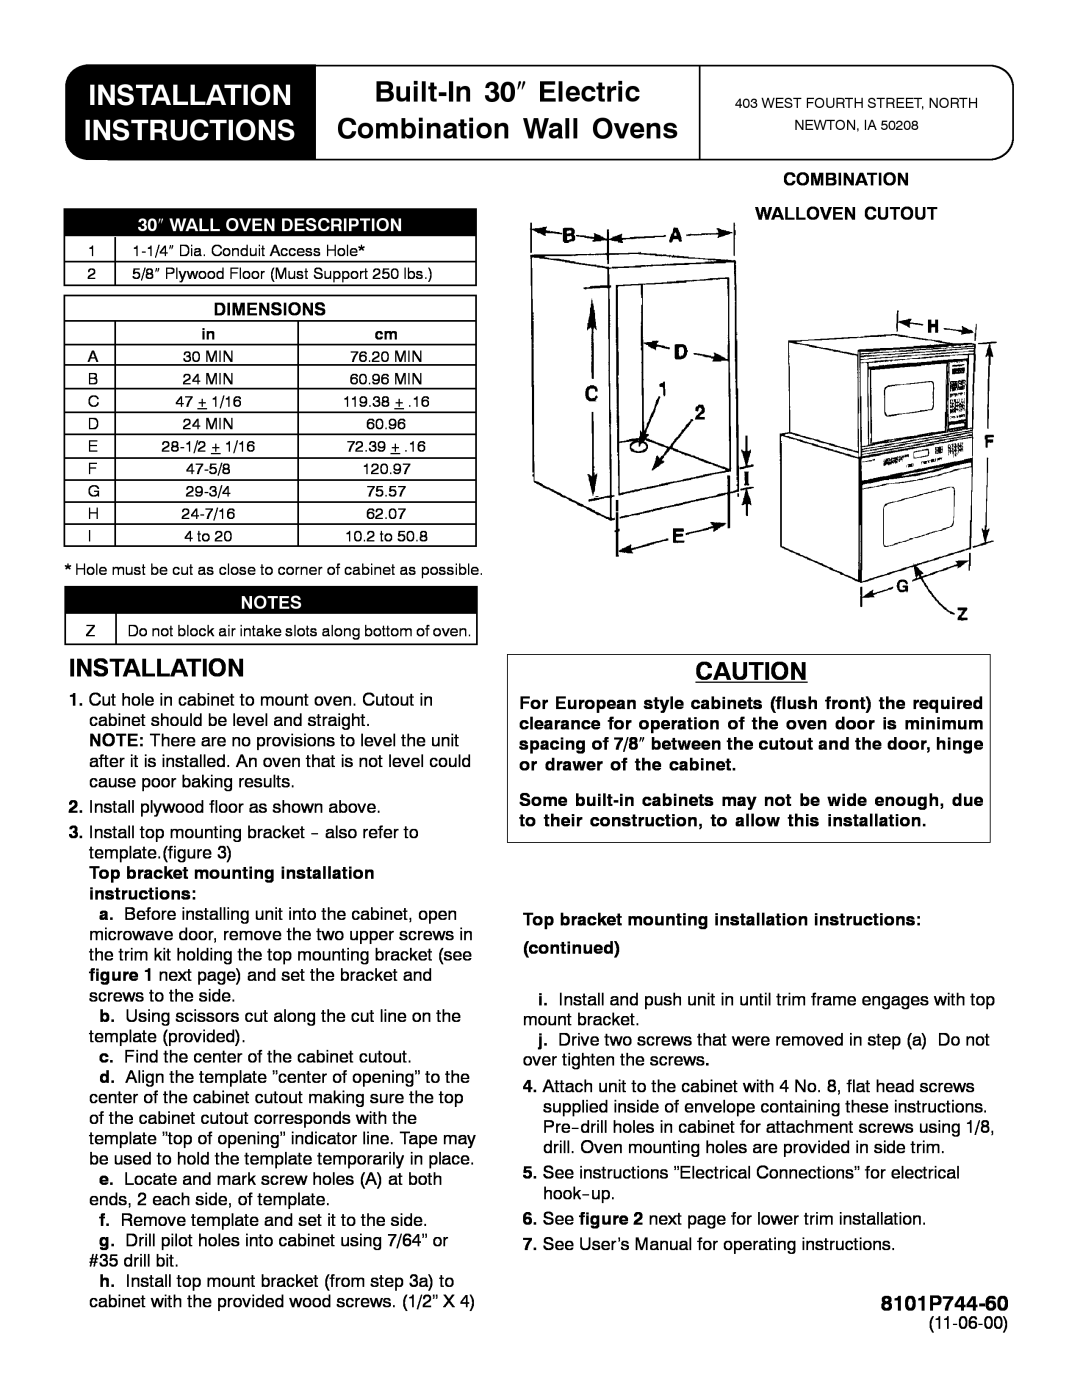 Maytag 11-06-00 installation instructions Installation, Built-In 30″ Electric, Instructions, Combination Wall Ovens 